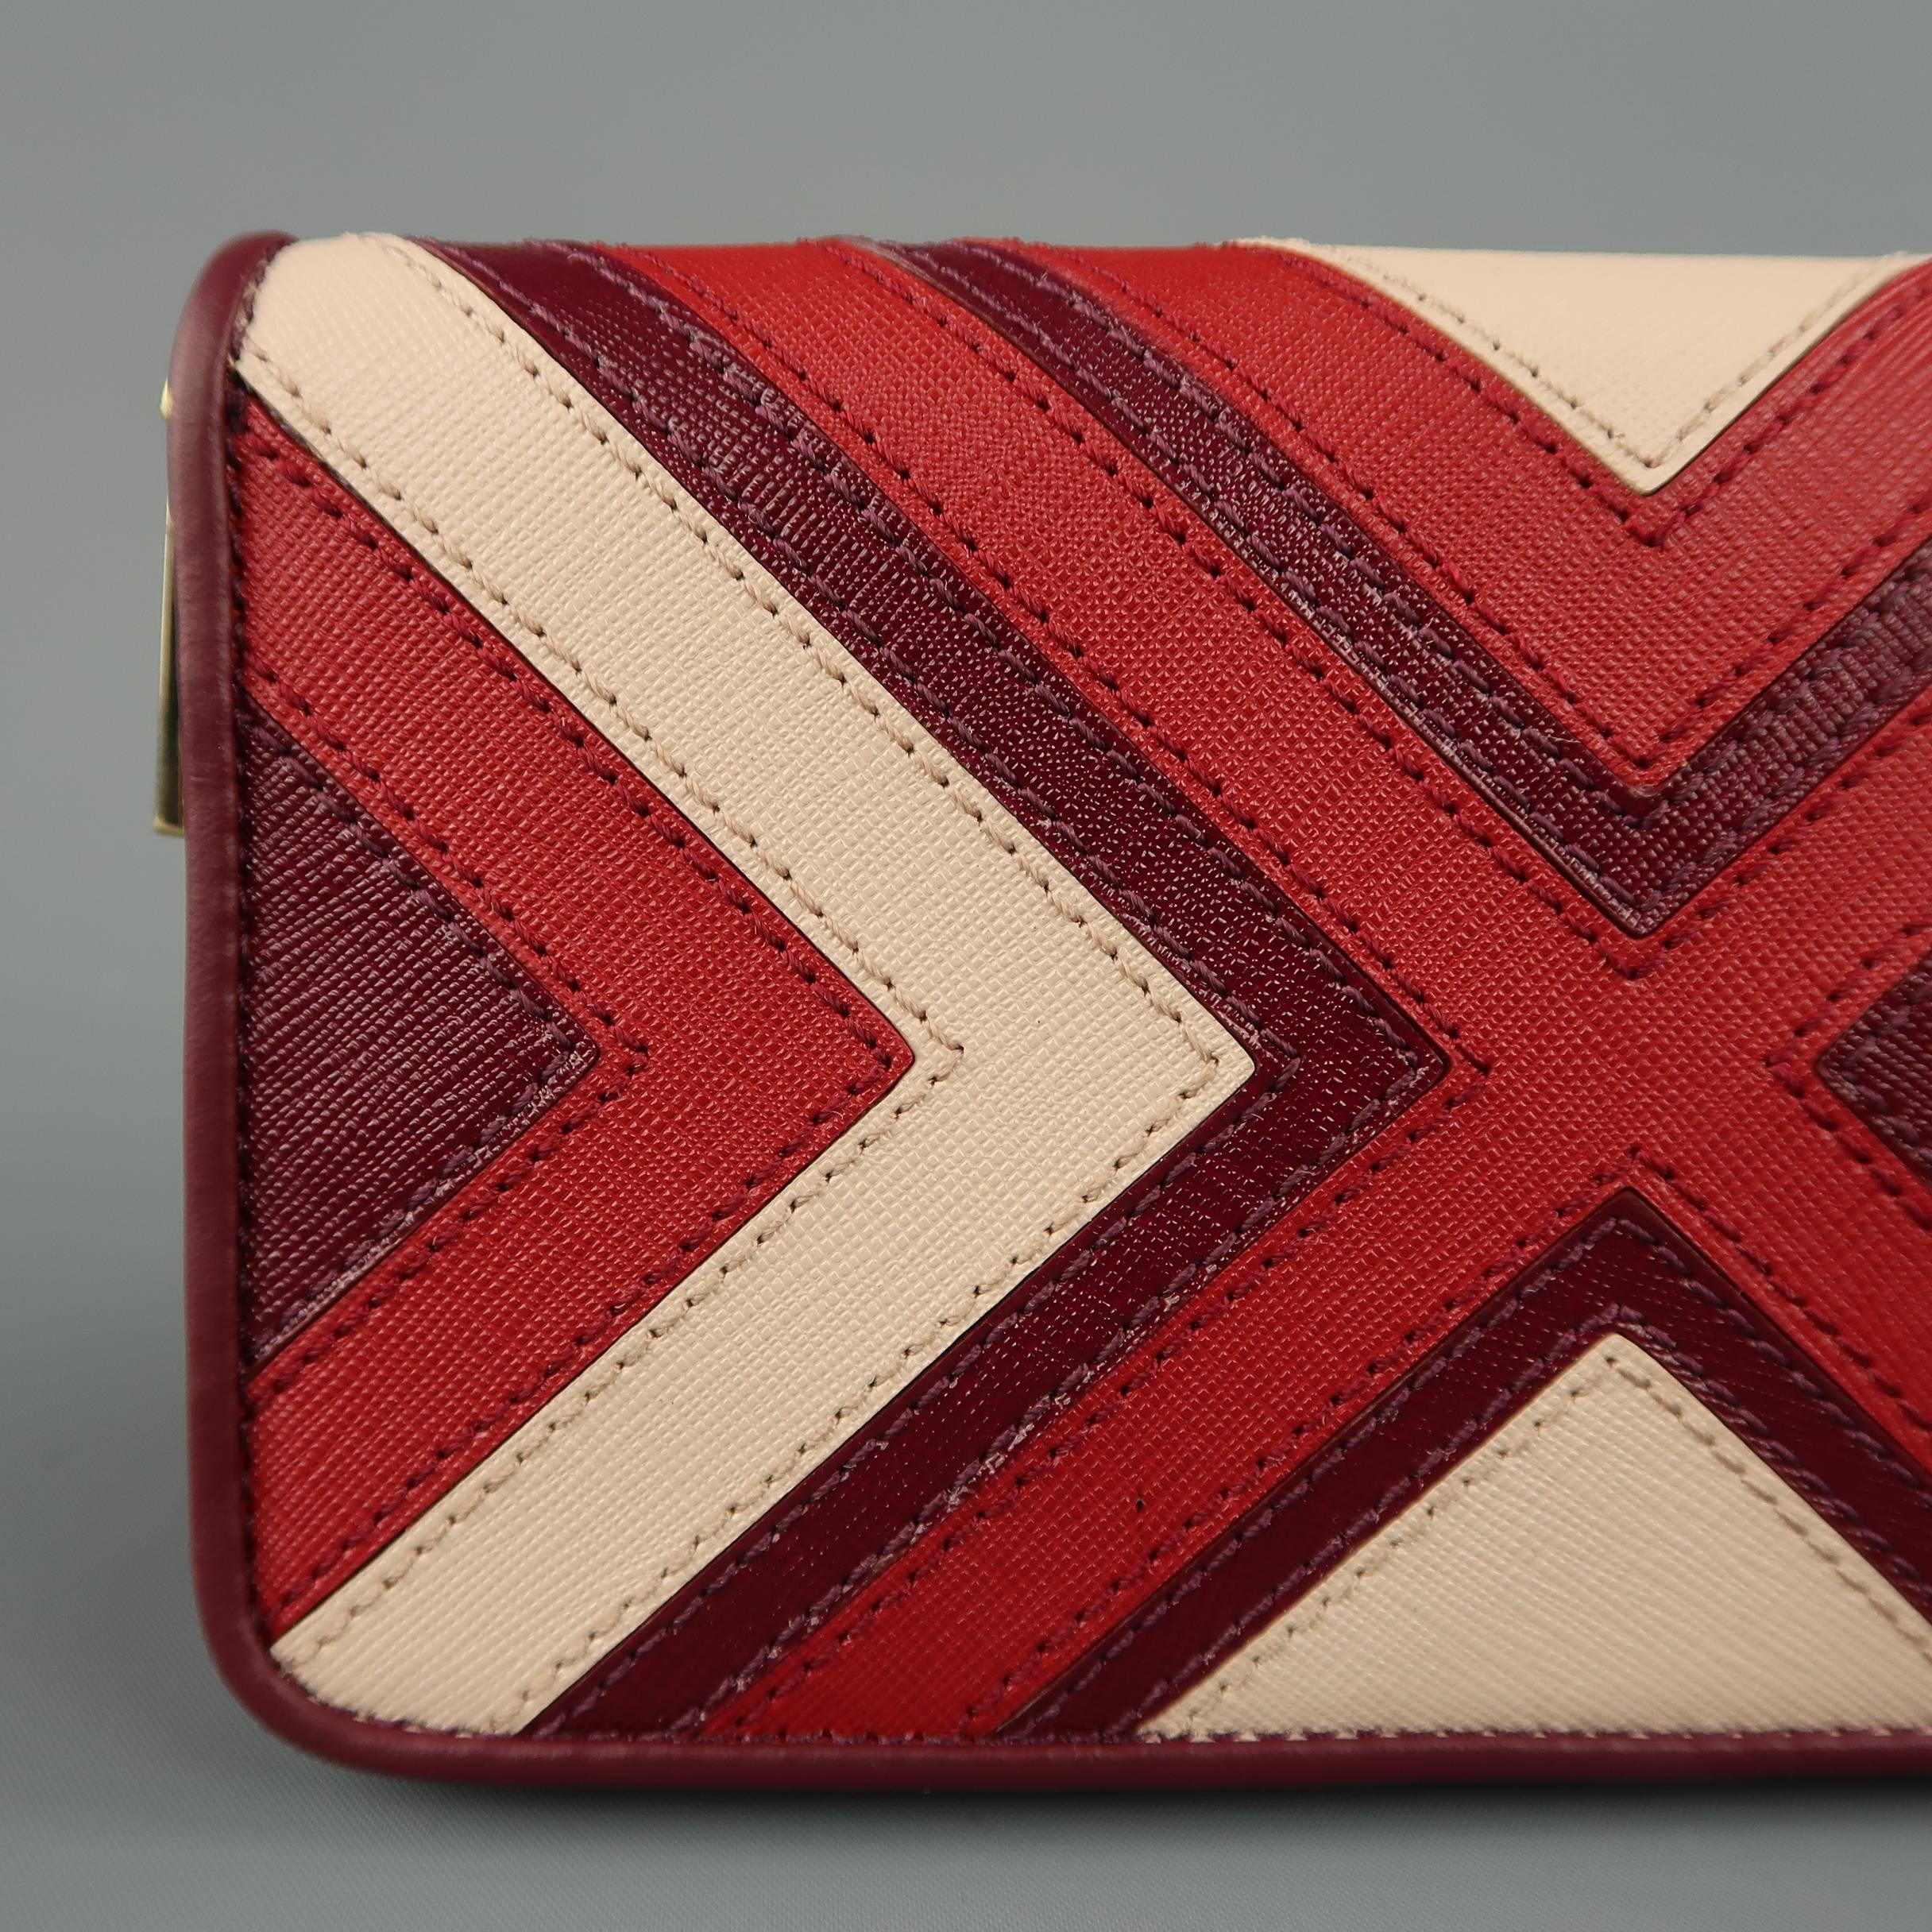 tory burch red wallet